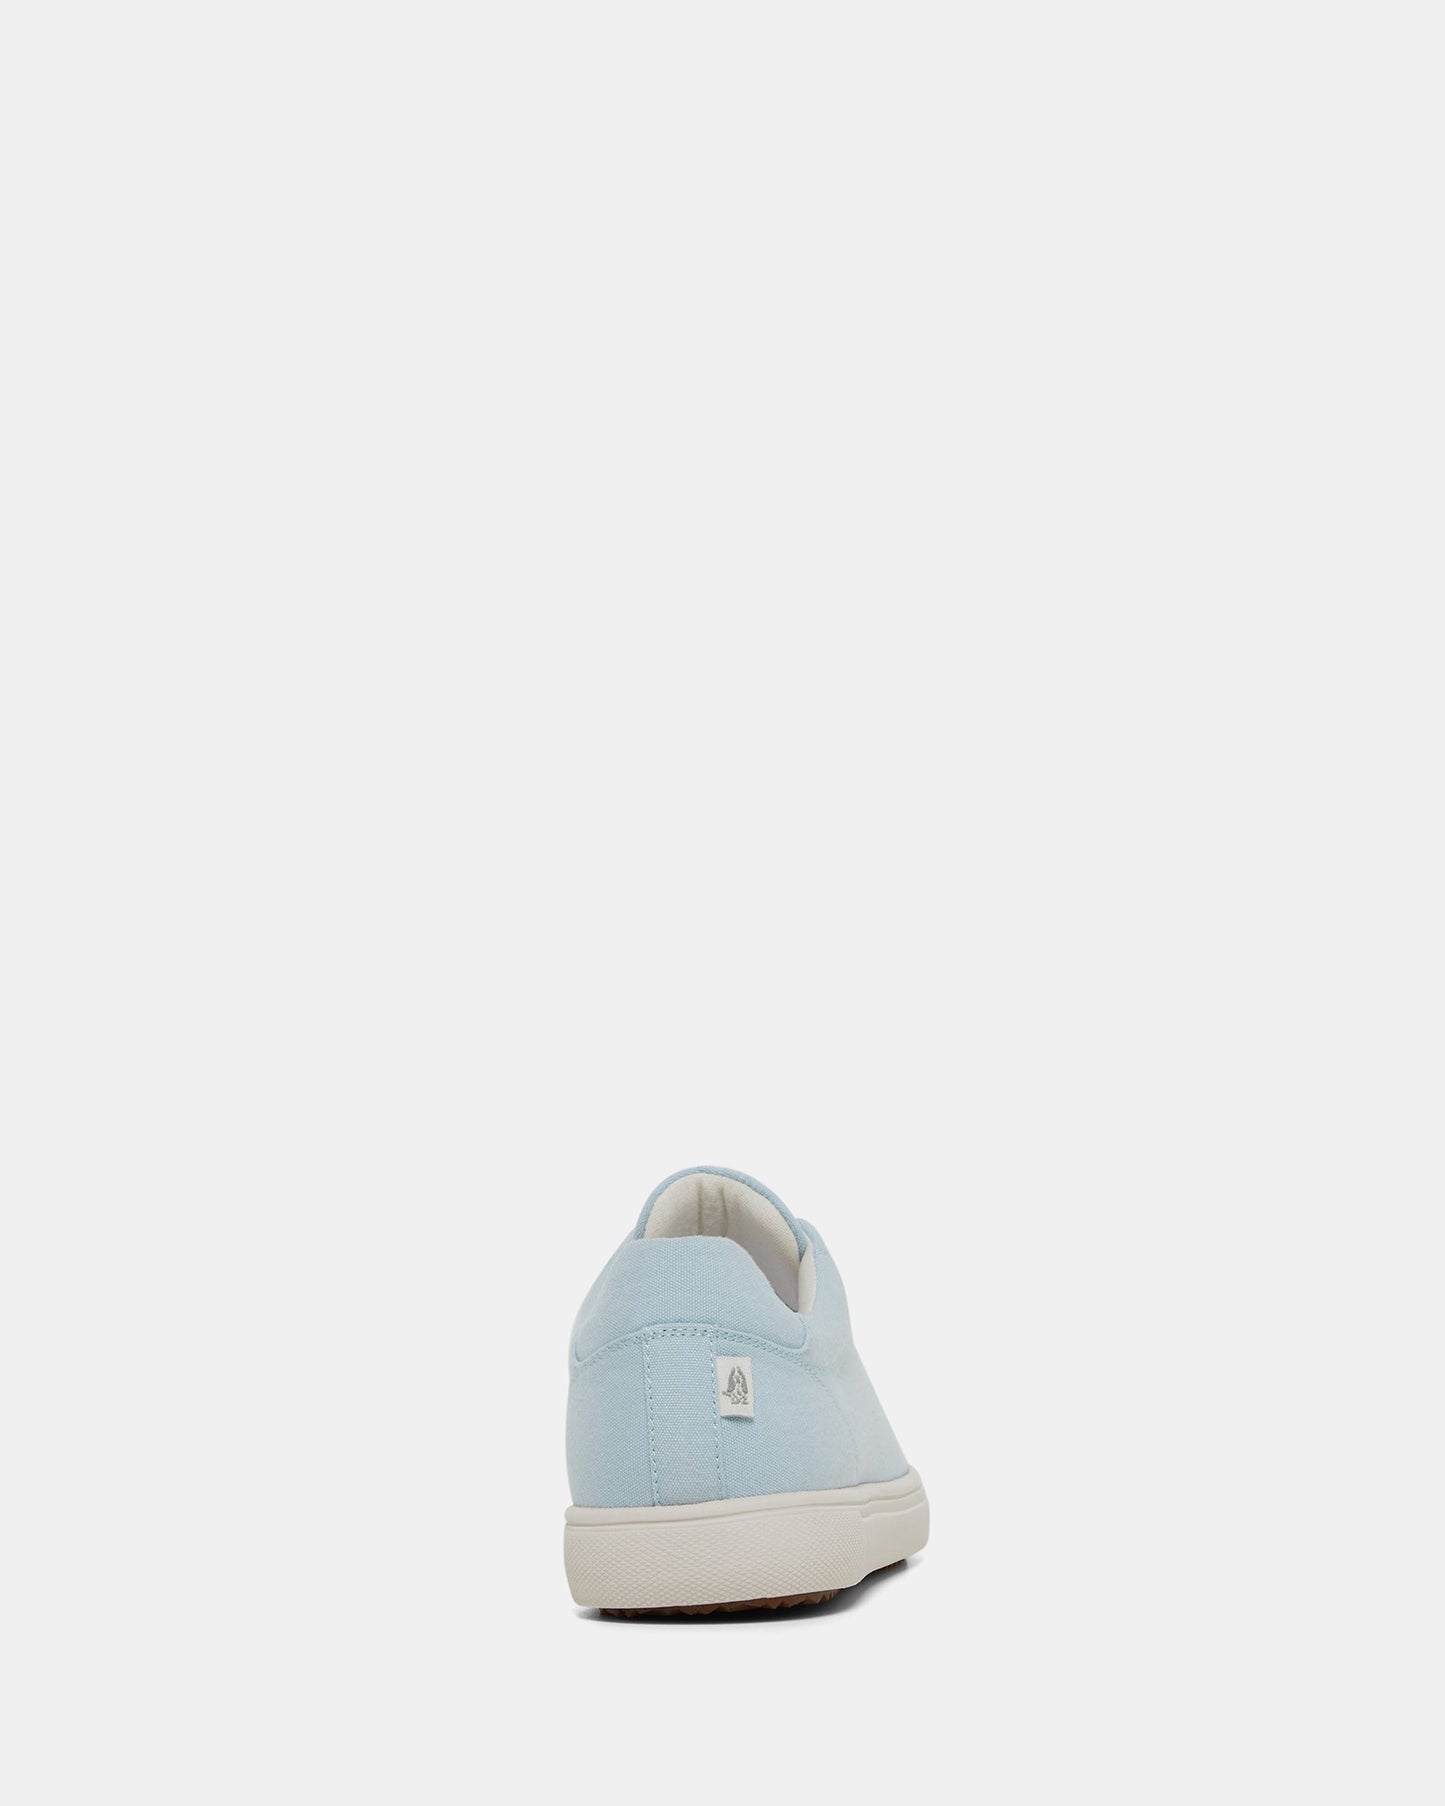 Hush Puppies Tickle - Dusty Blue